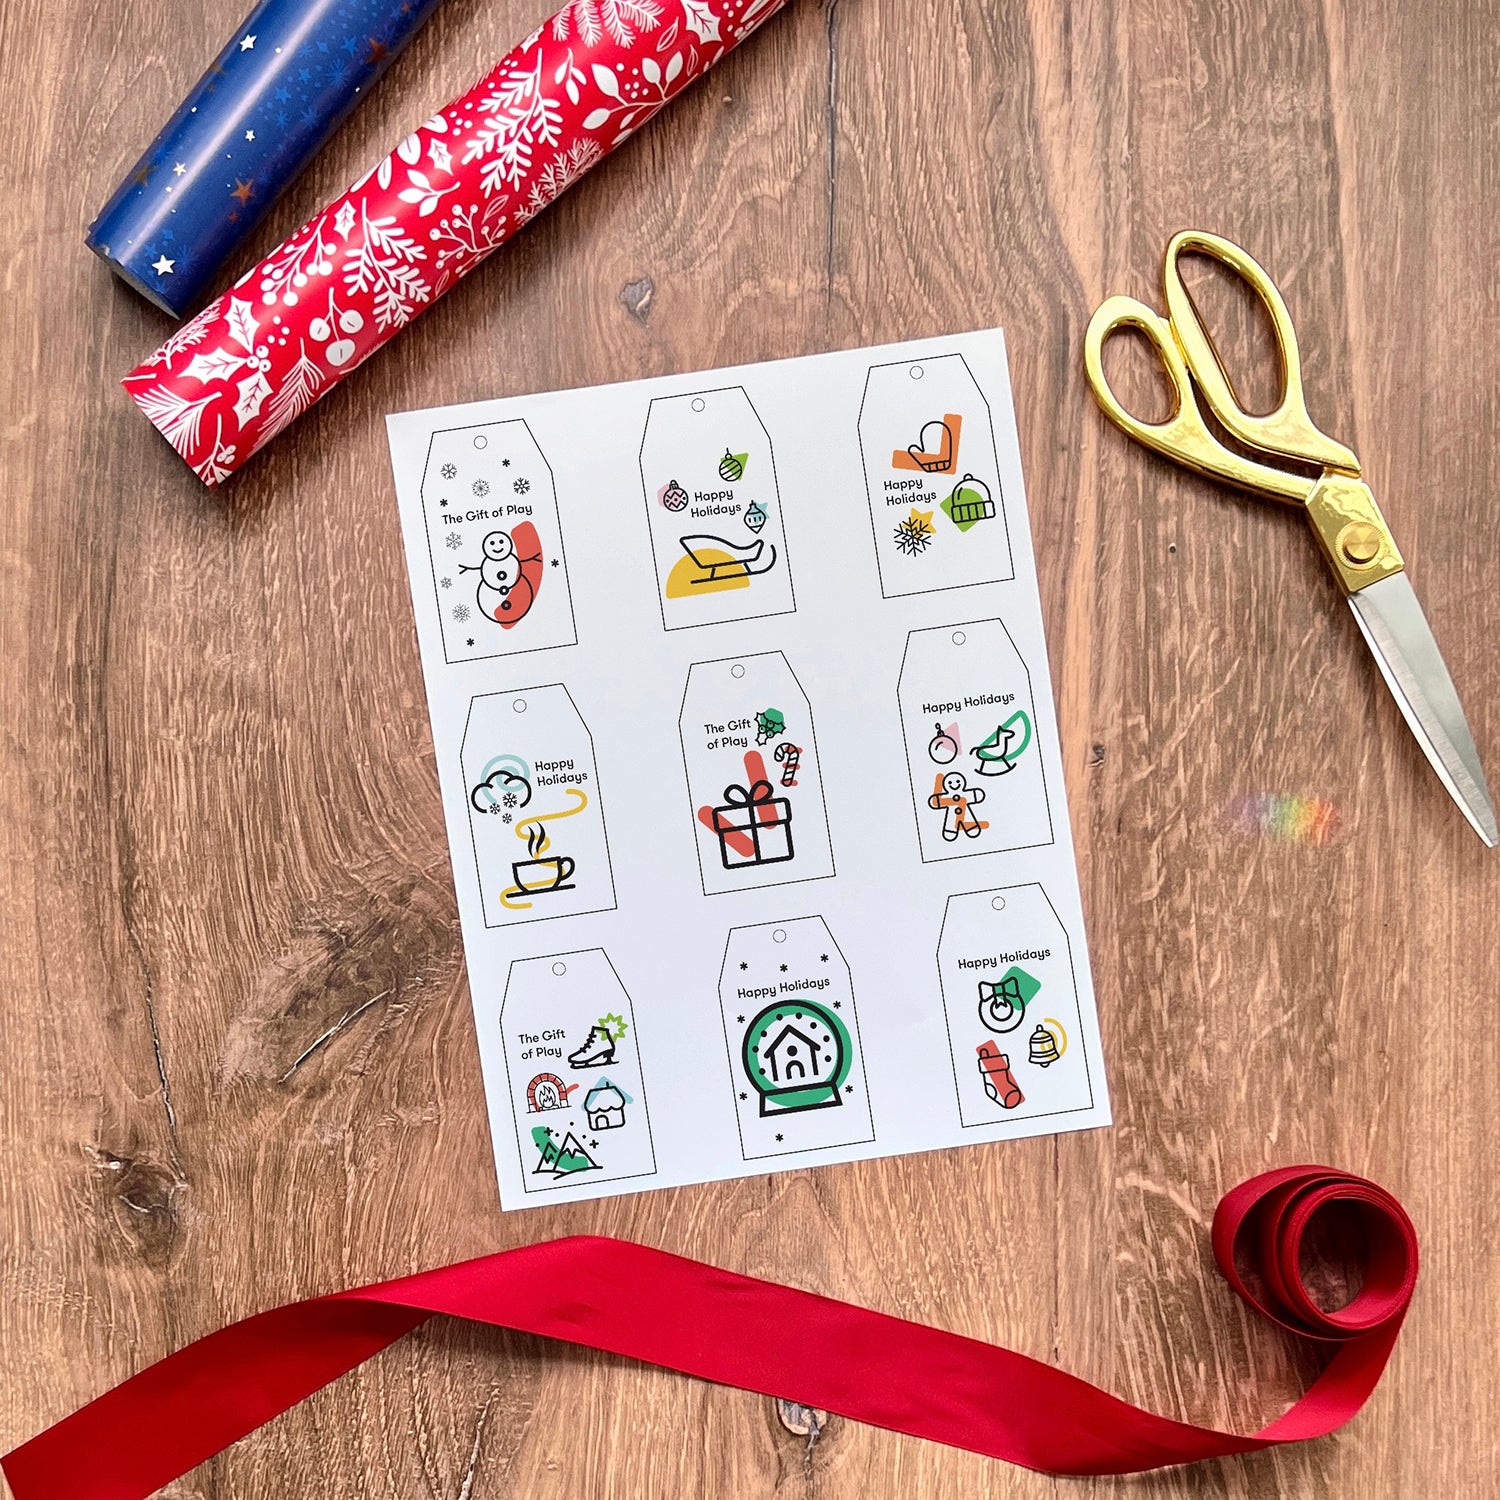 Printable gift tags for the holidays by SimplyFun